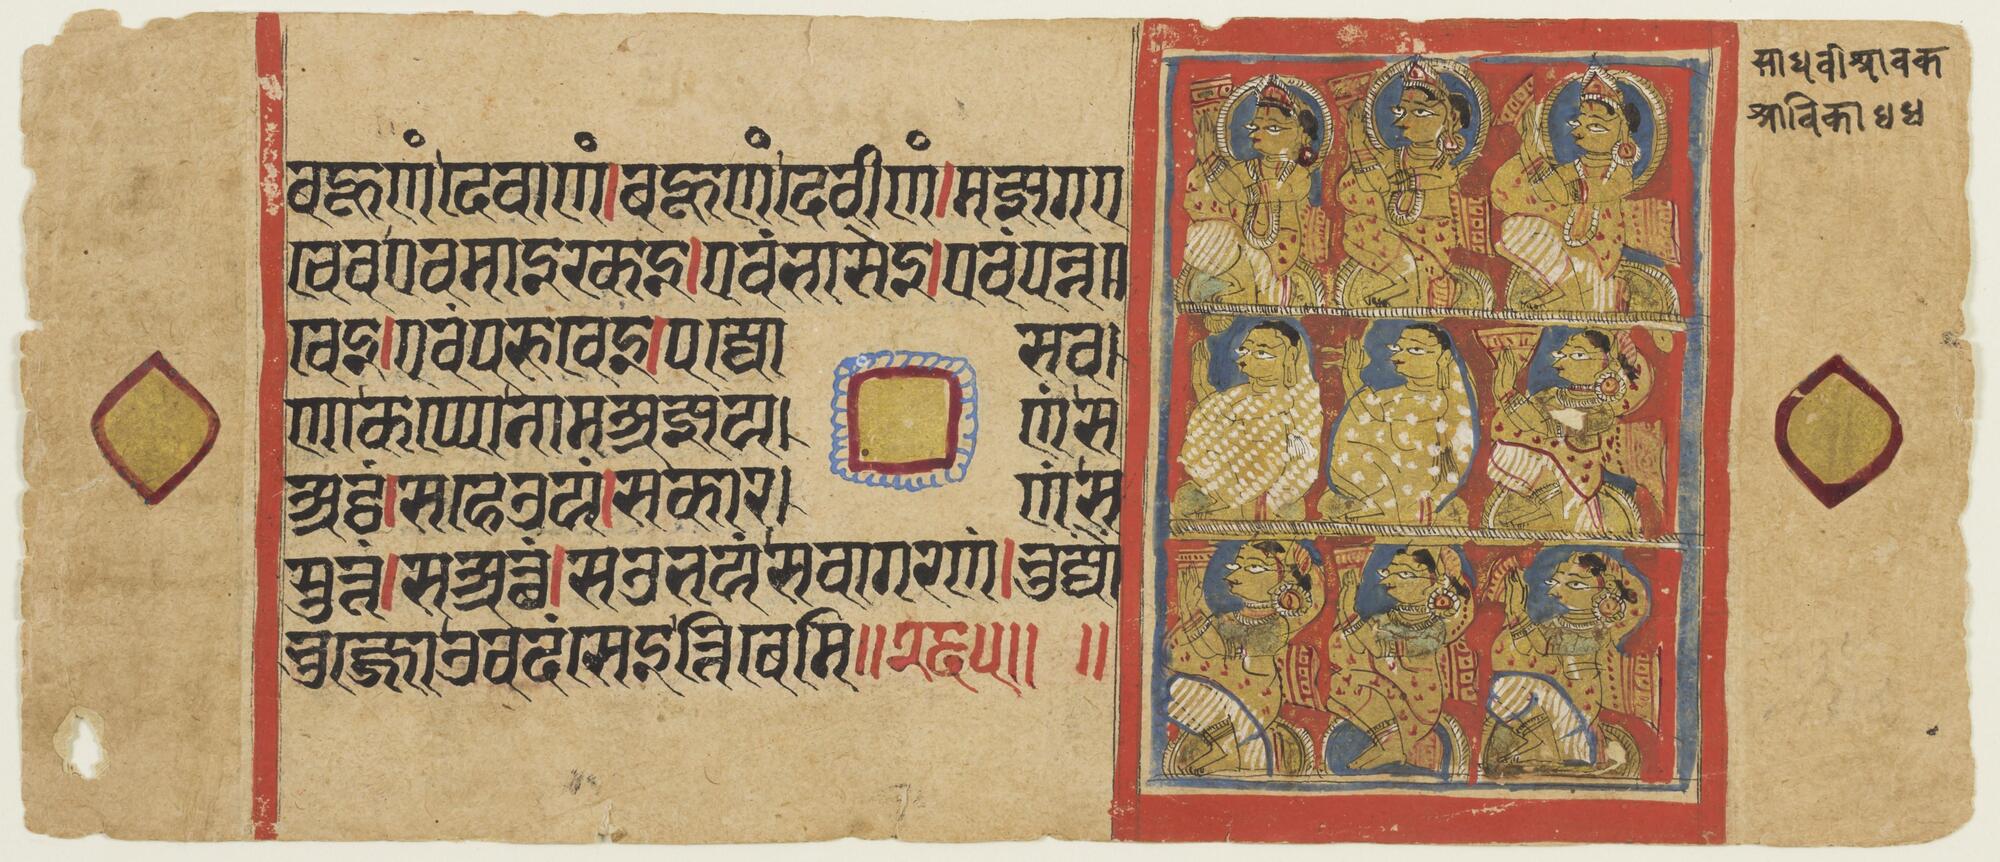 The horizontal folio from a Kalpasutra manuscript consists of seven lines of text to the left and center broken by a squarish gold symbol framed in a red line and cusped blue lines. Gold diamond shapes framed in red are at the sides, with a vertical red line between the one on the left and the text. Between the text and the right diamond shape there is a painting consisting of three registers of figures against a red ground. The top row depicts three laymen wearing crowns, the middle two monks and a nun and the bottom row three nuns.